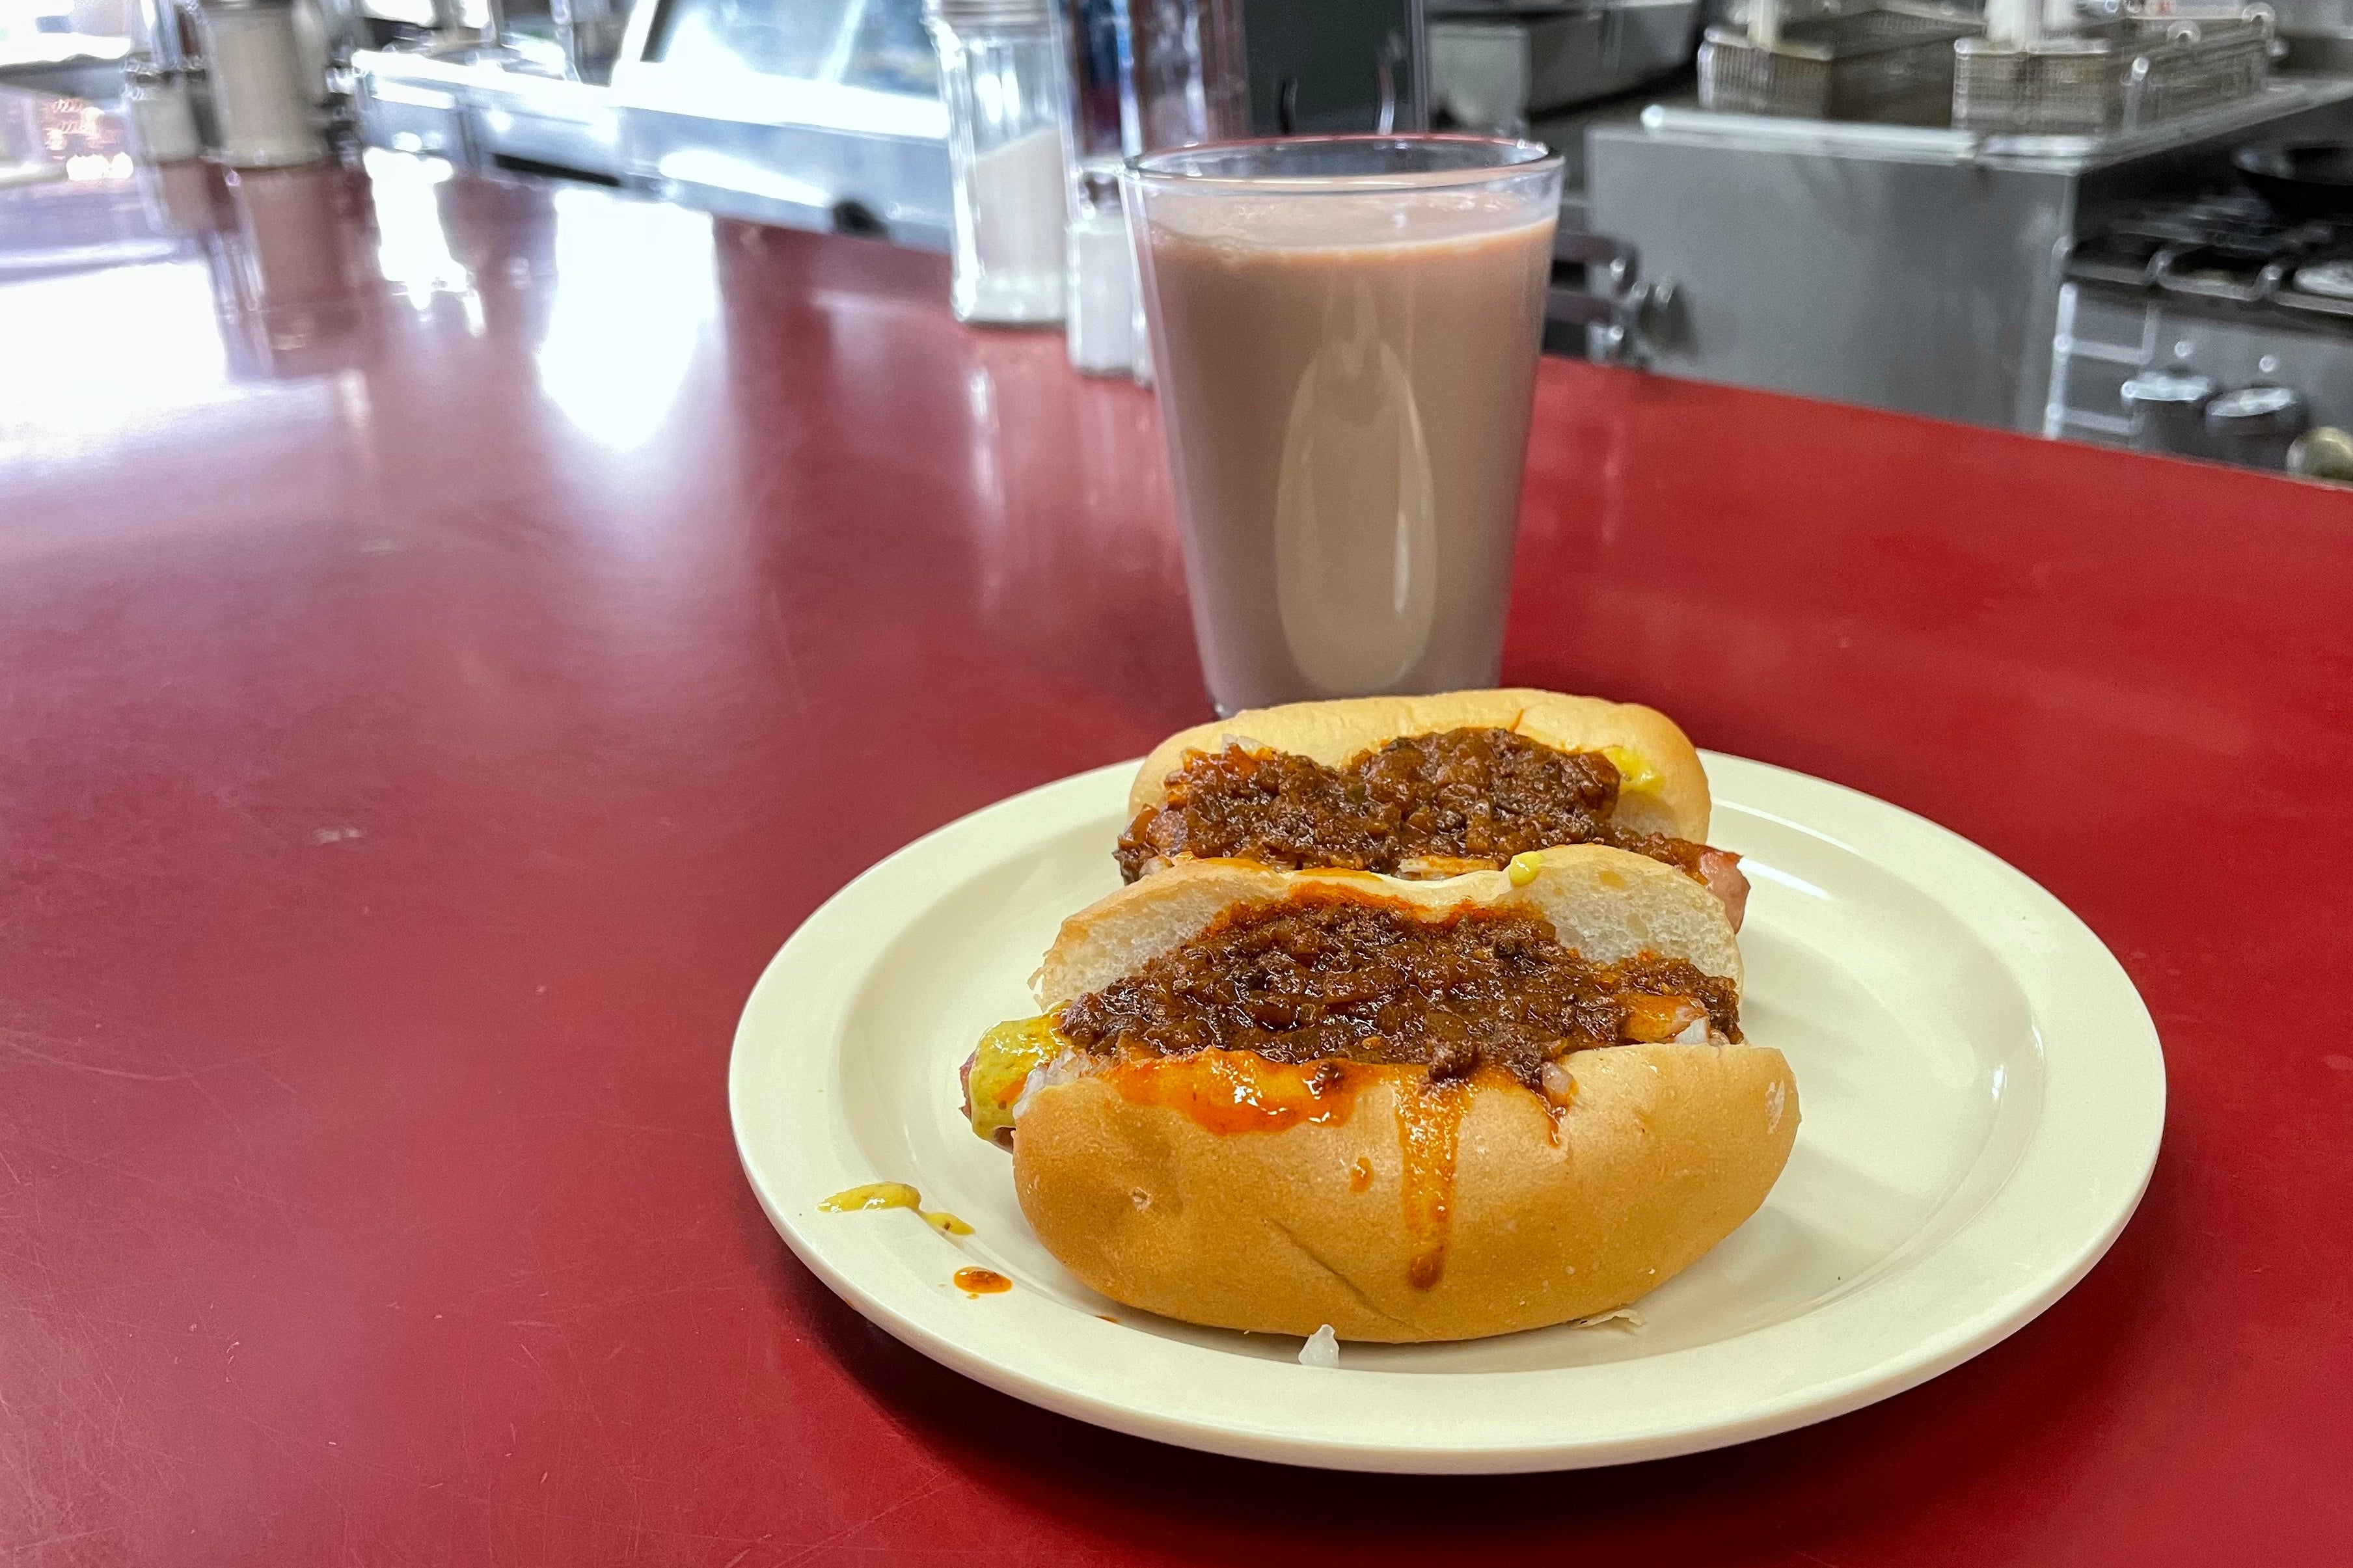 Two mini chili dogs sit on a paper plate on a red counter.